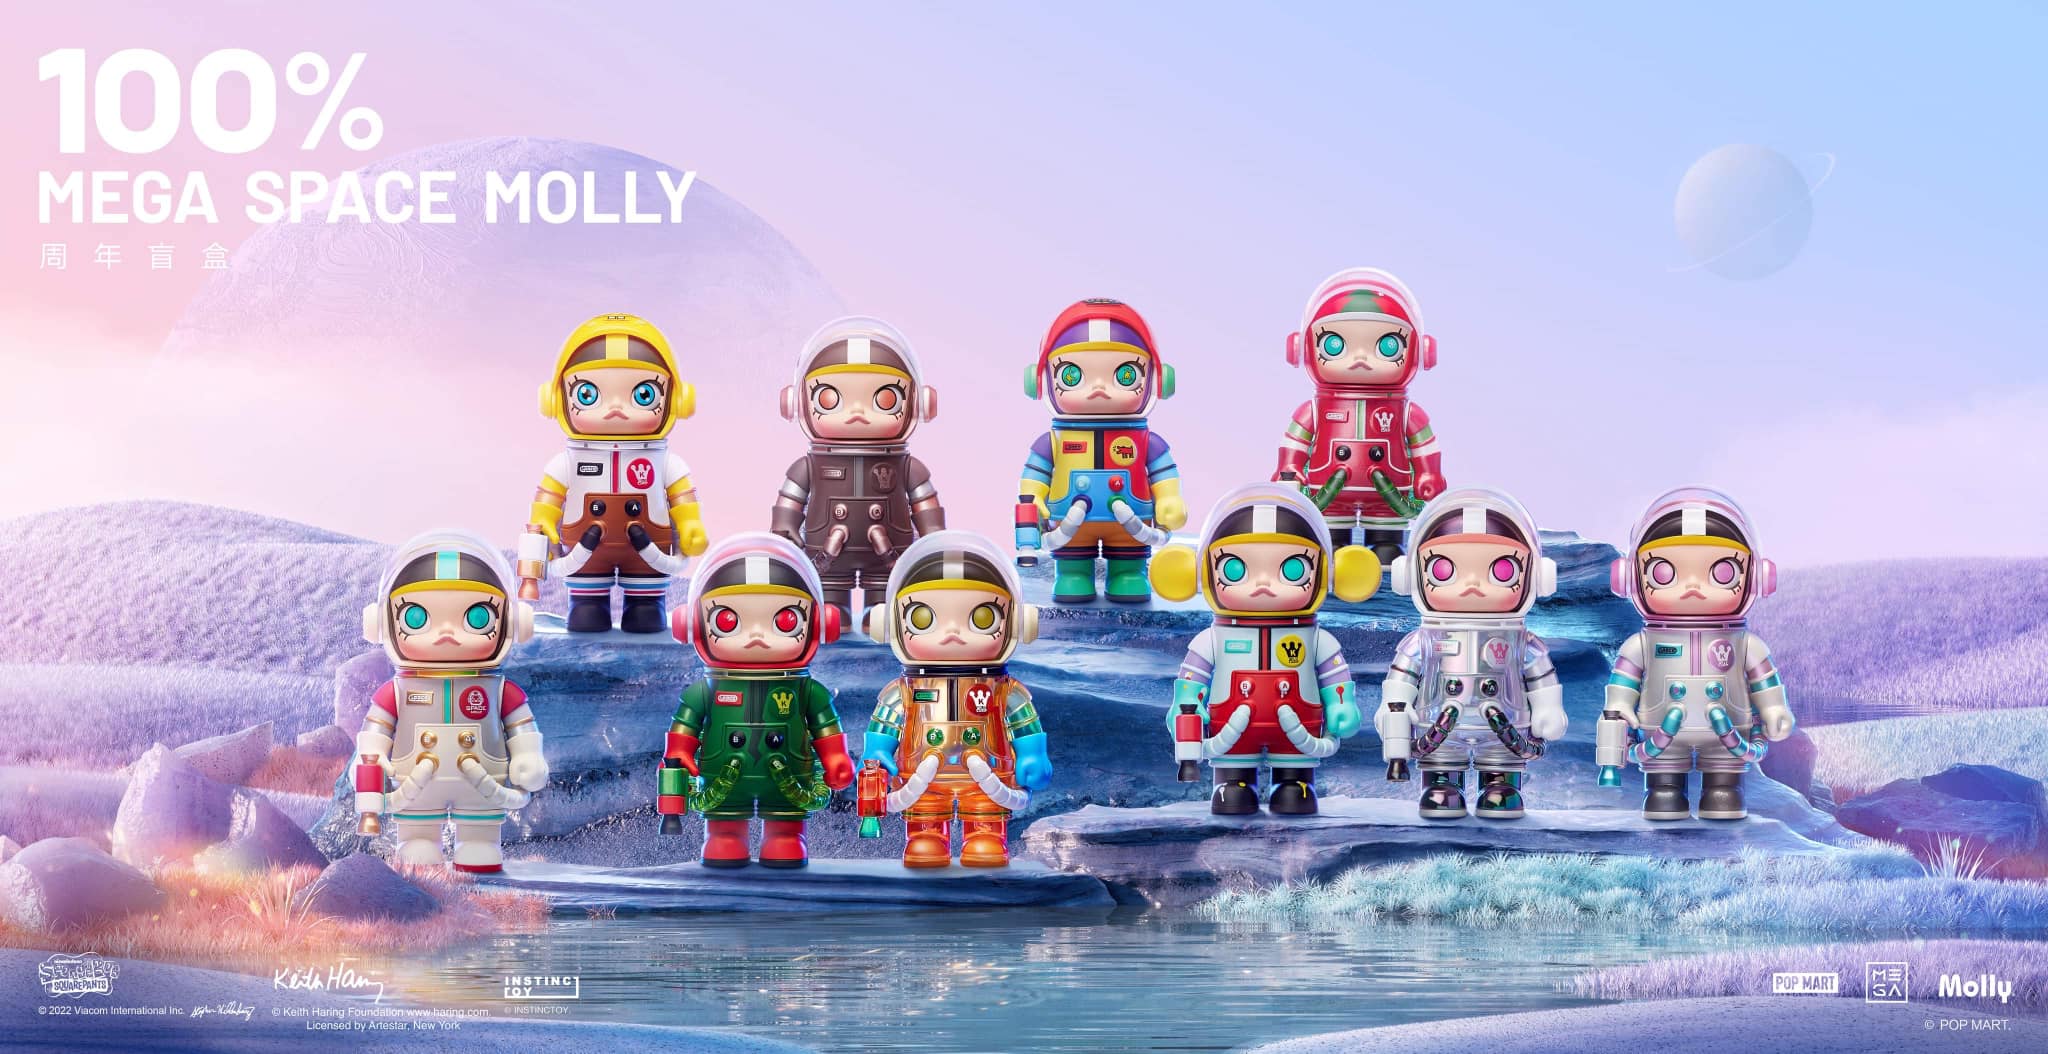 POP MART x Kenny Wong's MEGA COLLECTION 100% SPACE MOLLY Blind Box